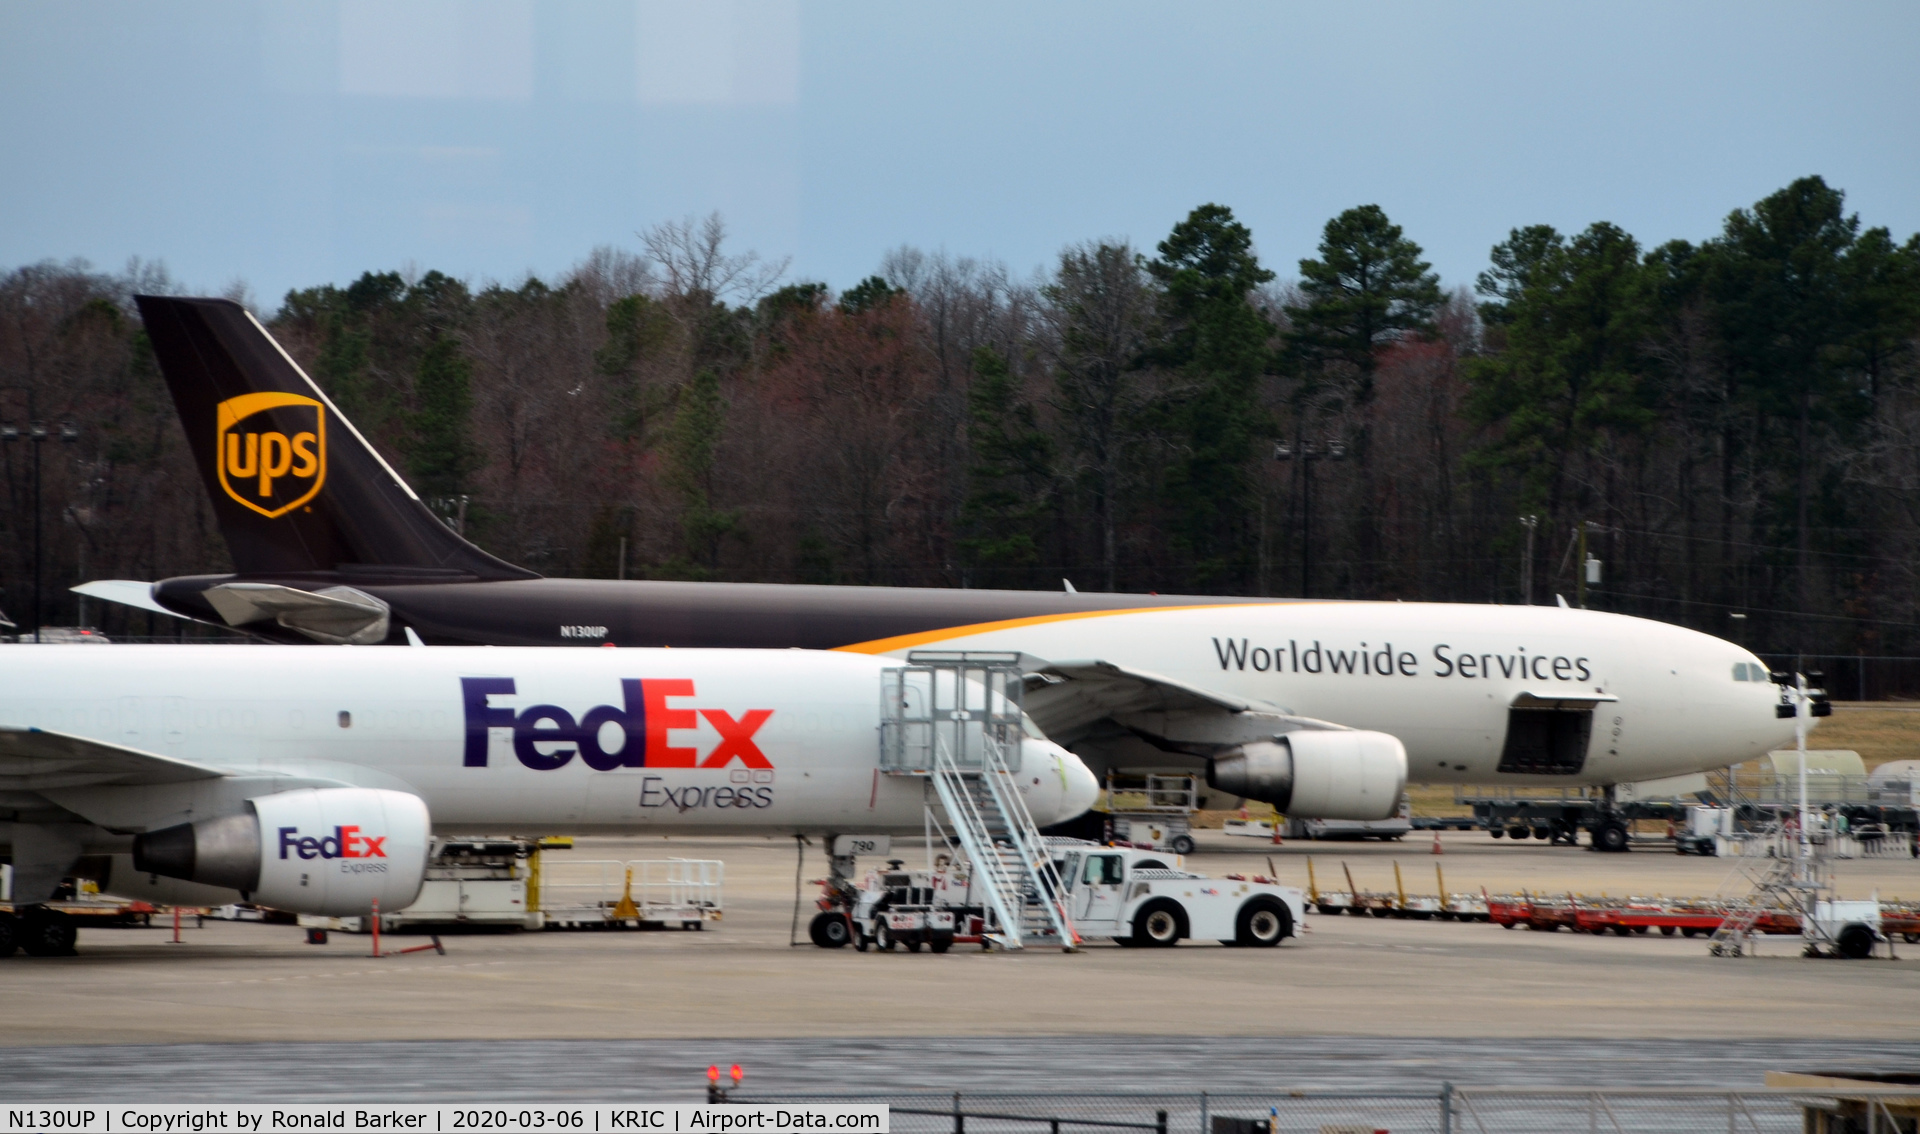 N130UP, 2001 Airbus A300F4-622R C/N 0814, Parked RIC